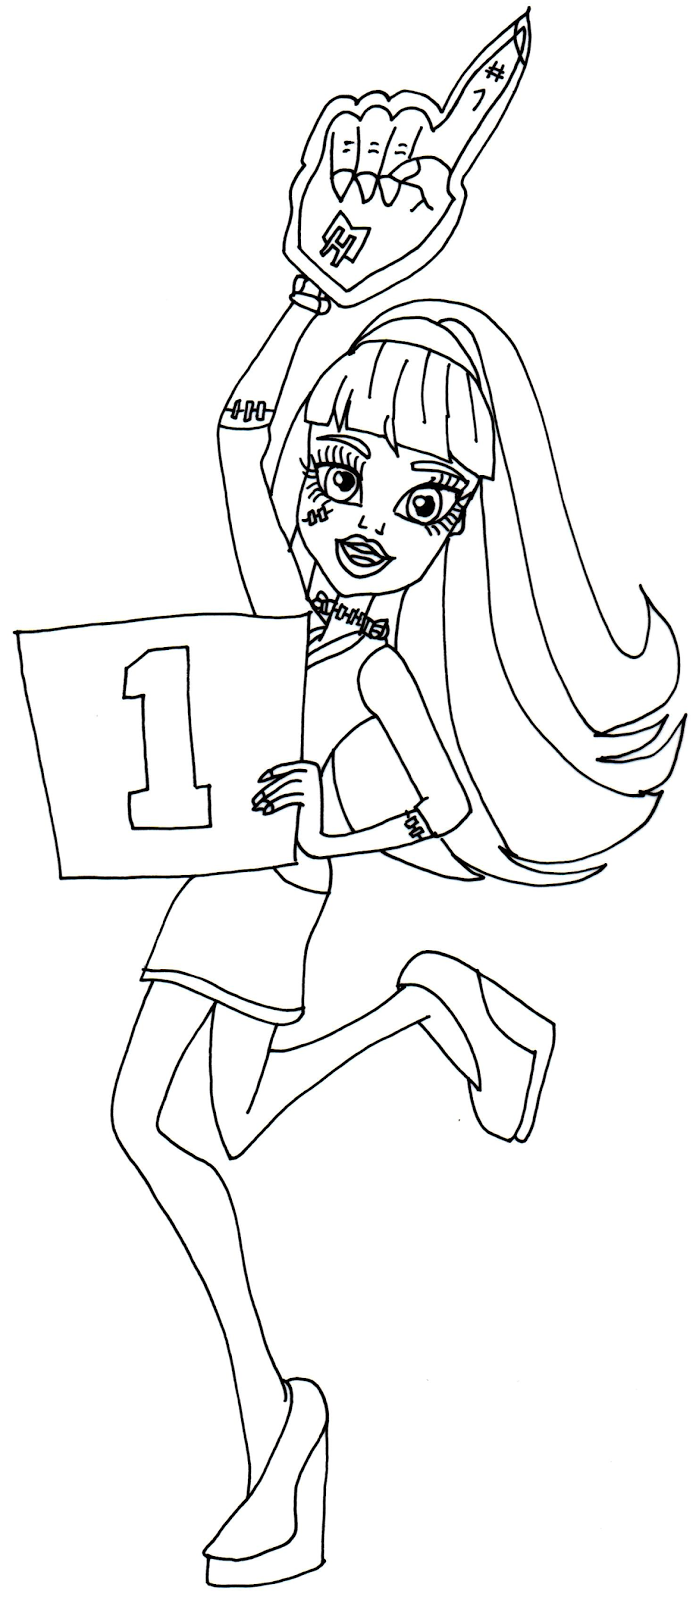 Download Free Printable Monster High Coloring Pages: Frankie Stein Ghoul Spirit Monster High Coloring Page